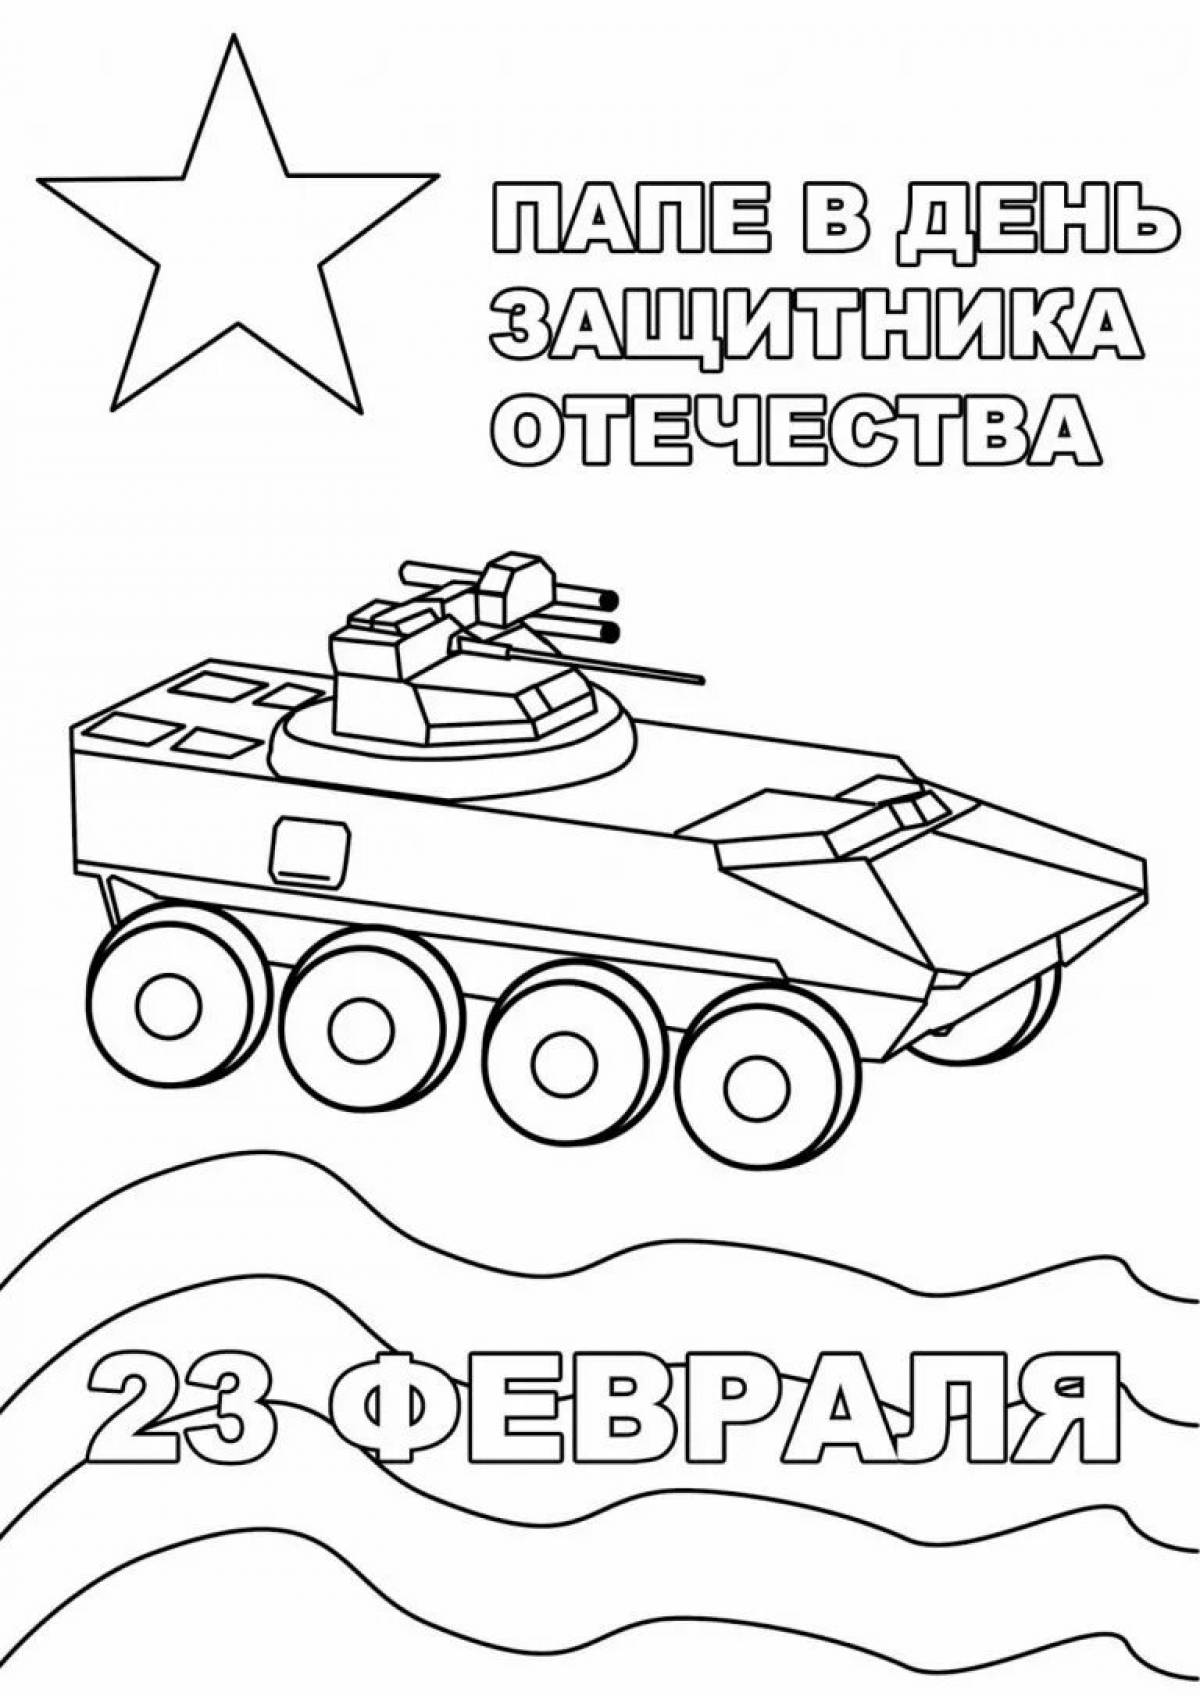 To the Day of Defender of the Fatherland in elementary school #17